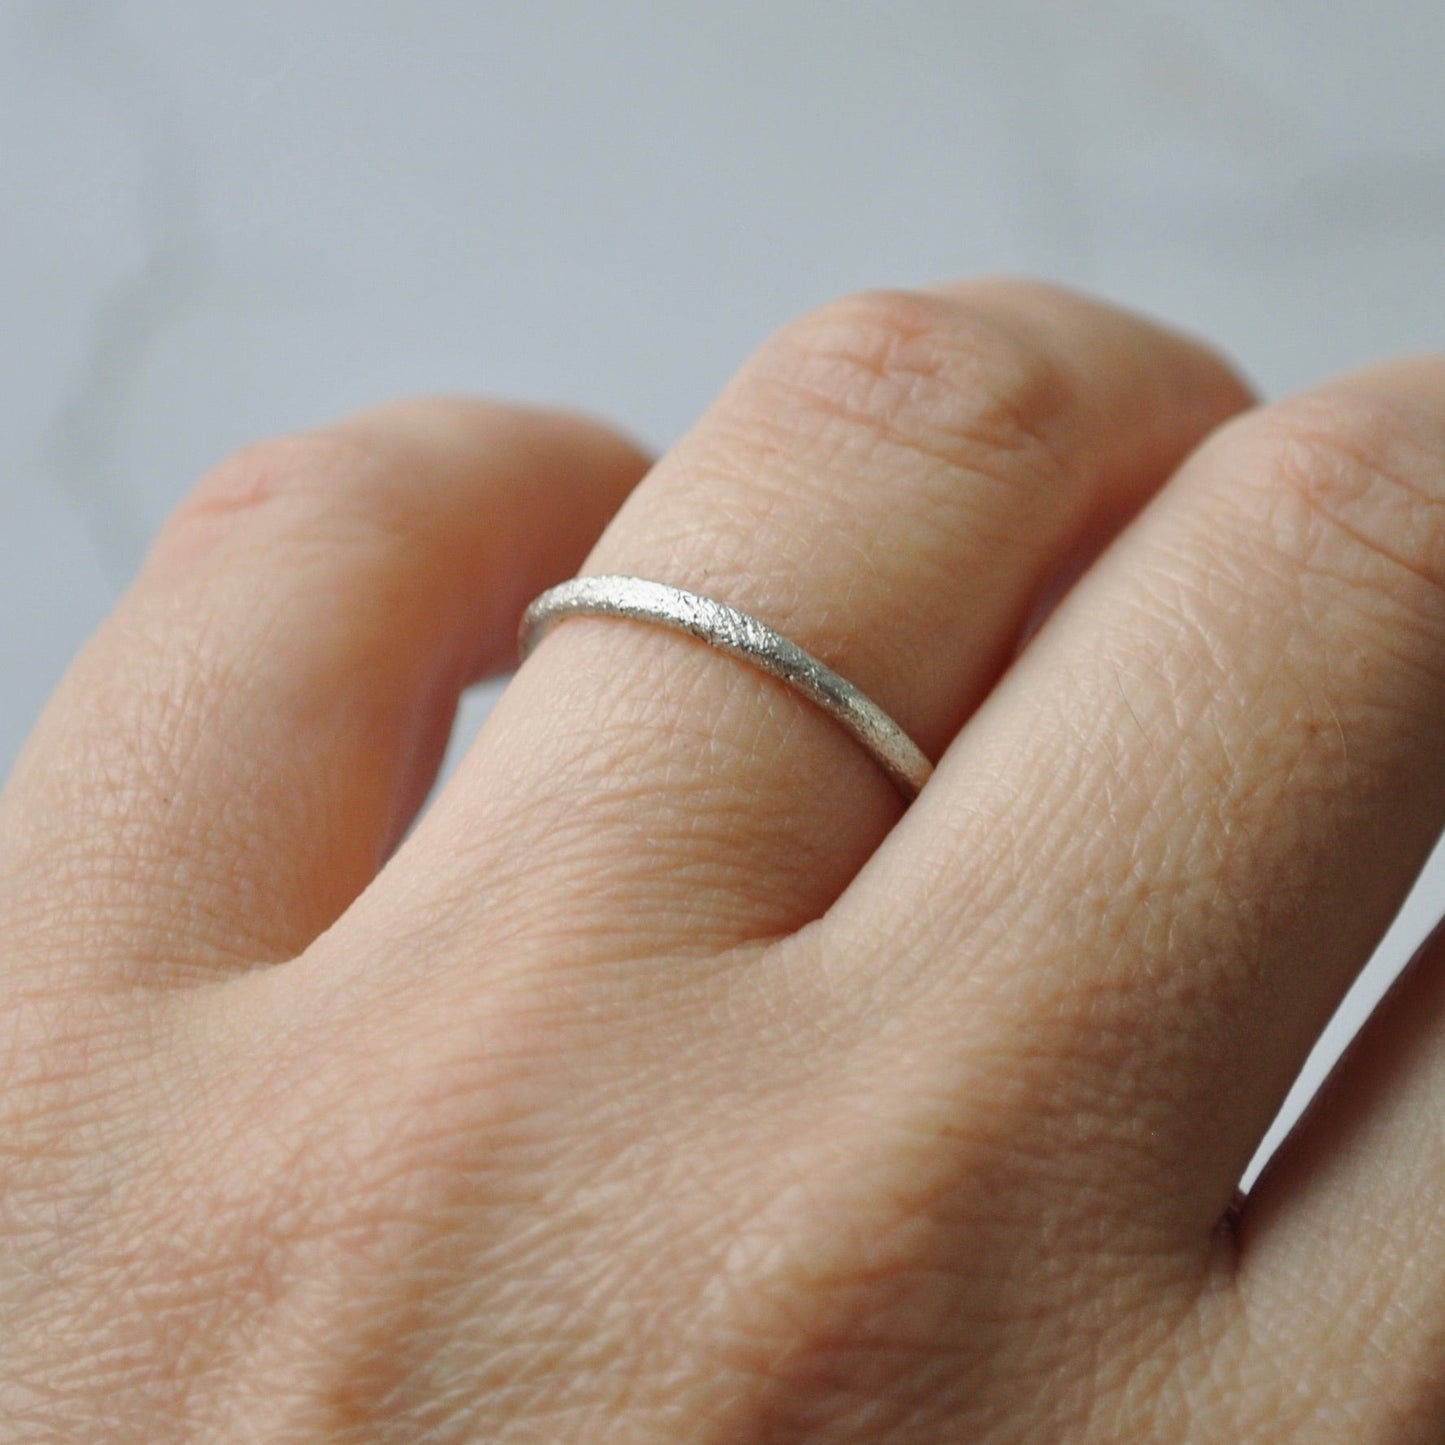 Raw Textured Slim Ring, Silver